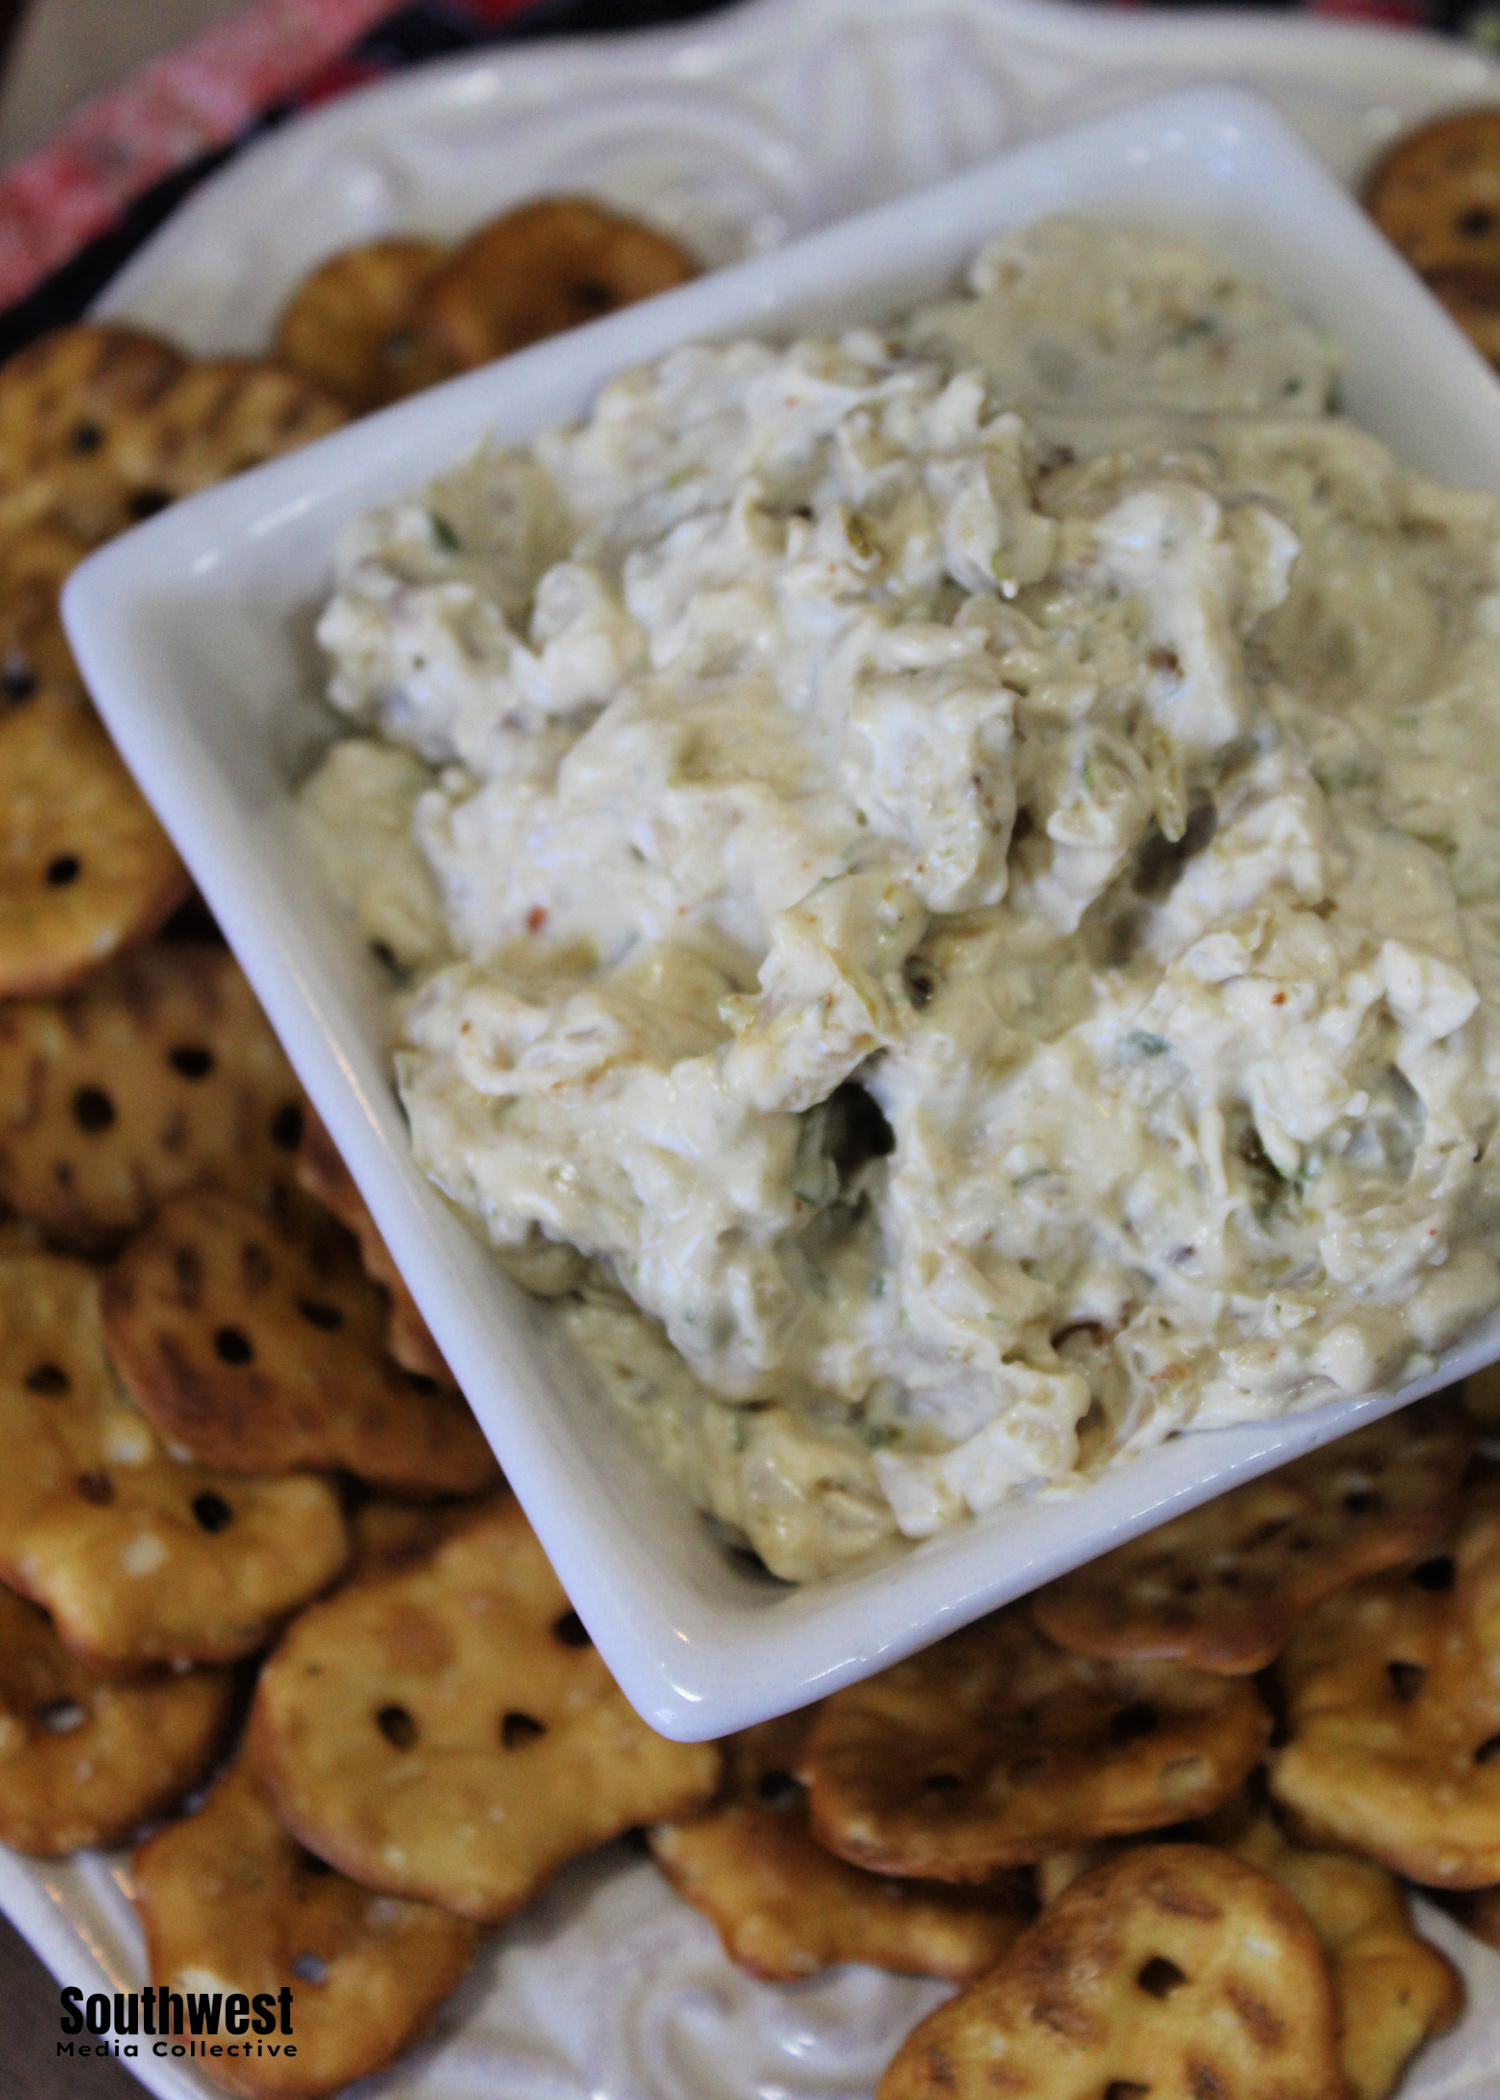 Just a handful of ingredients and this simple yet delicious Water Chestnut Dip comes together quickly and easily - perfect on crackers, or as a side to a cheeseboard!